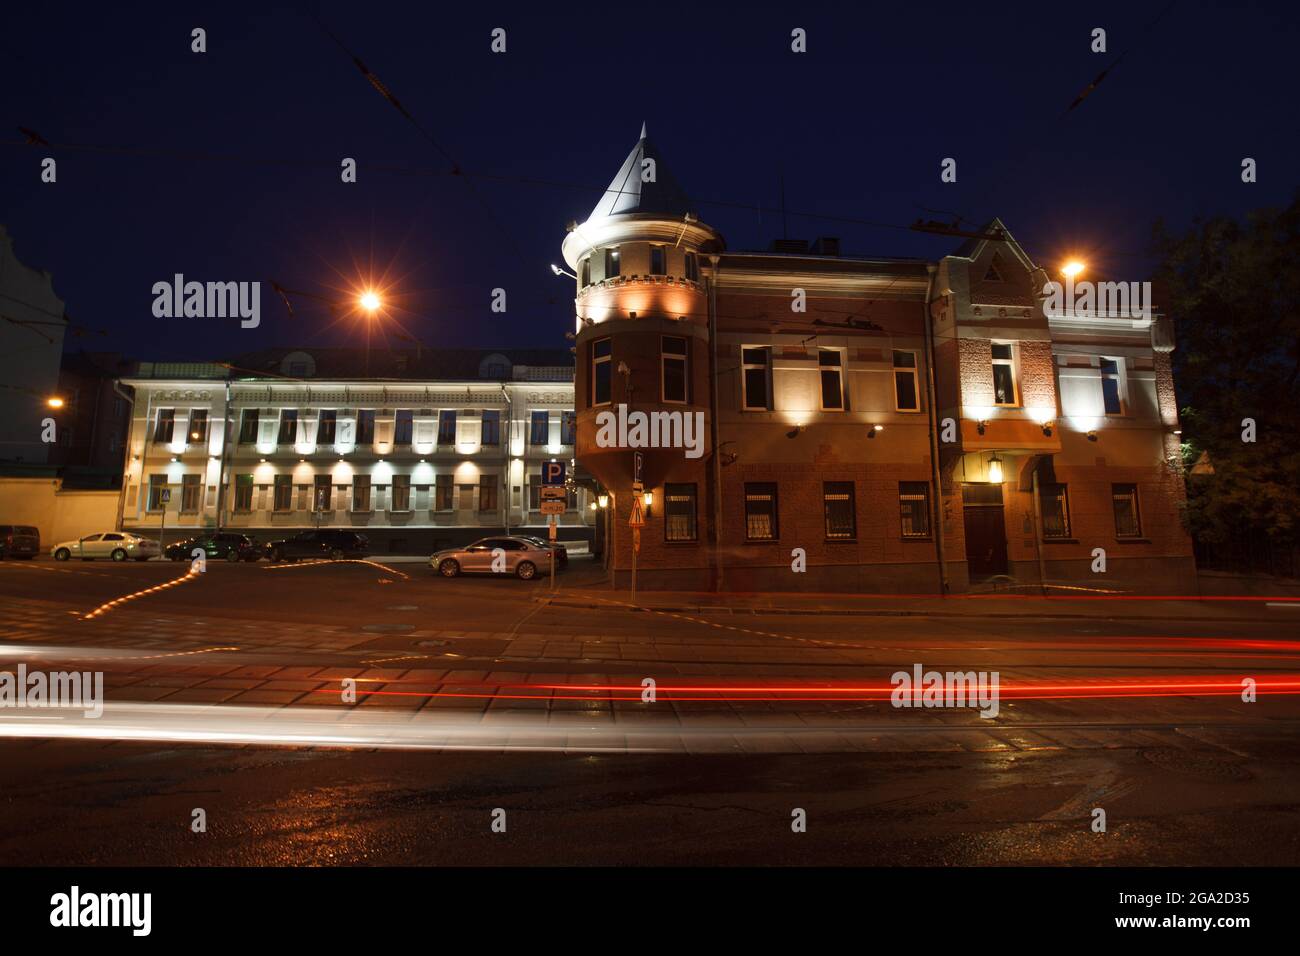 Moscow, Russia - July, 27 2014: Historical buildings in Moscow center at night. Mansion on Yauza boulevard. Tram rails and light traces on foreground Stock Photo